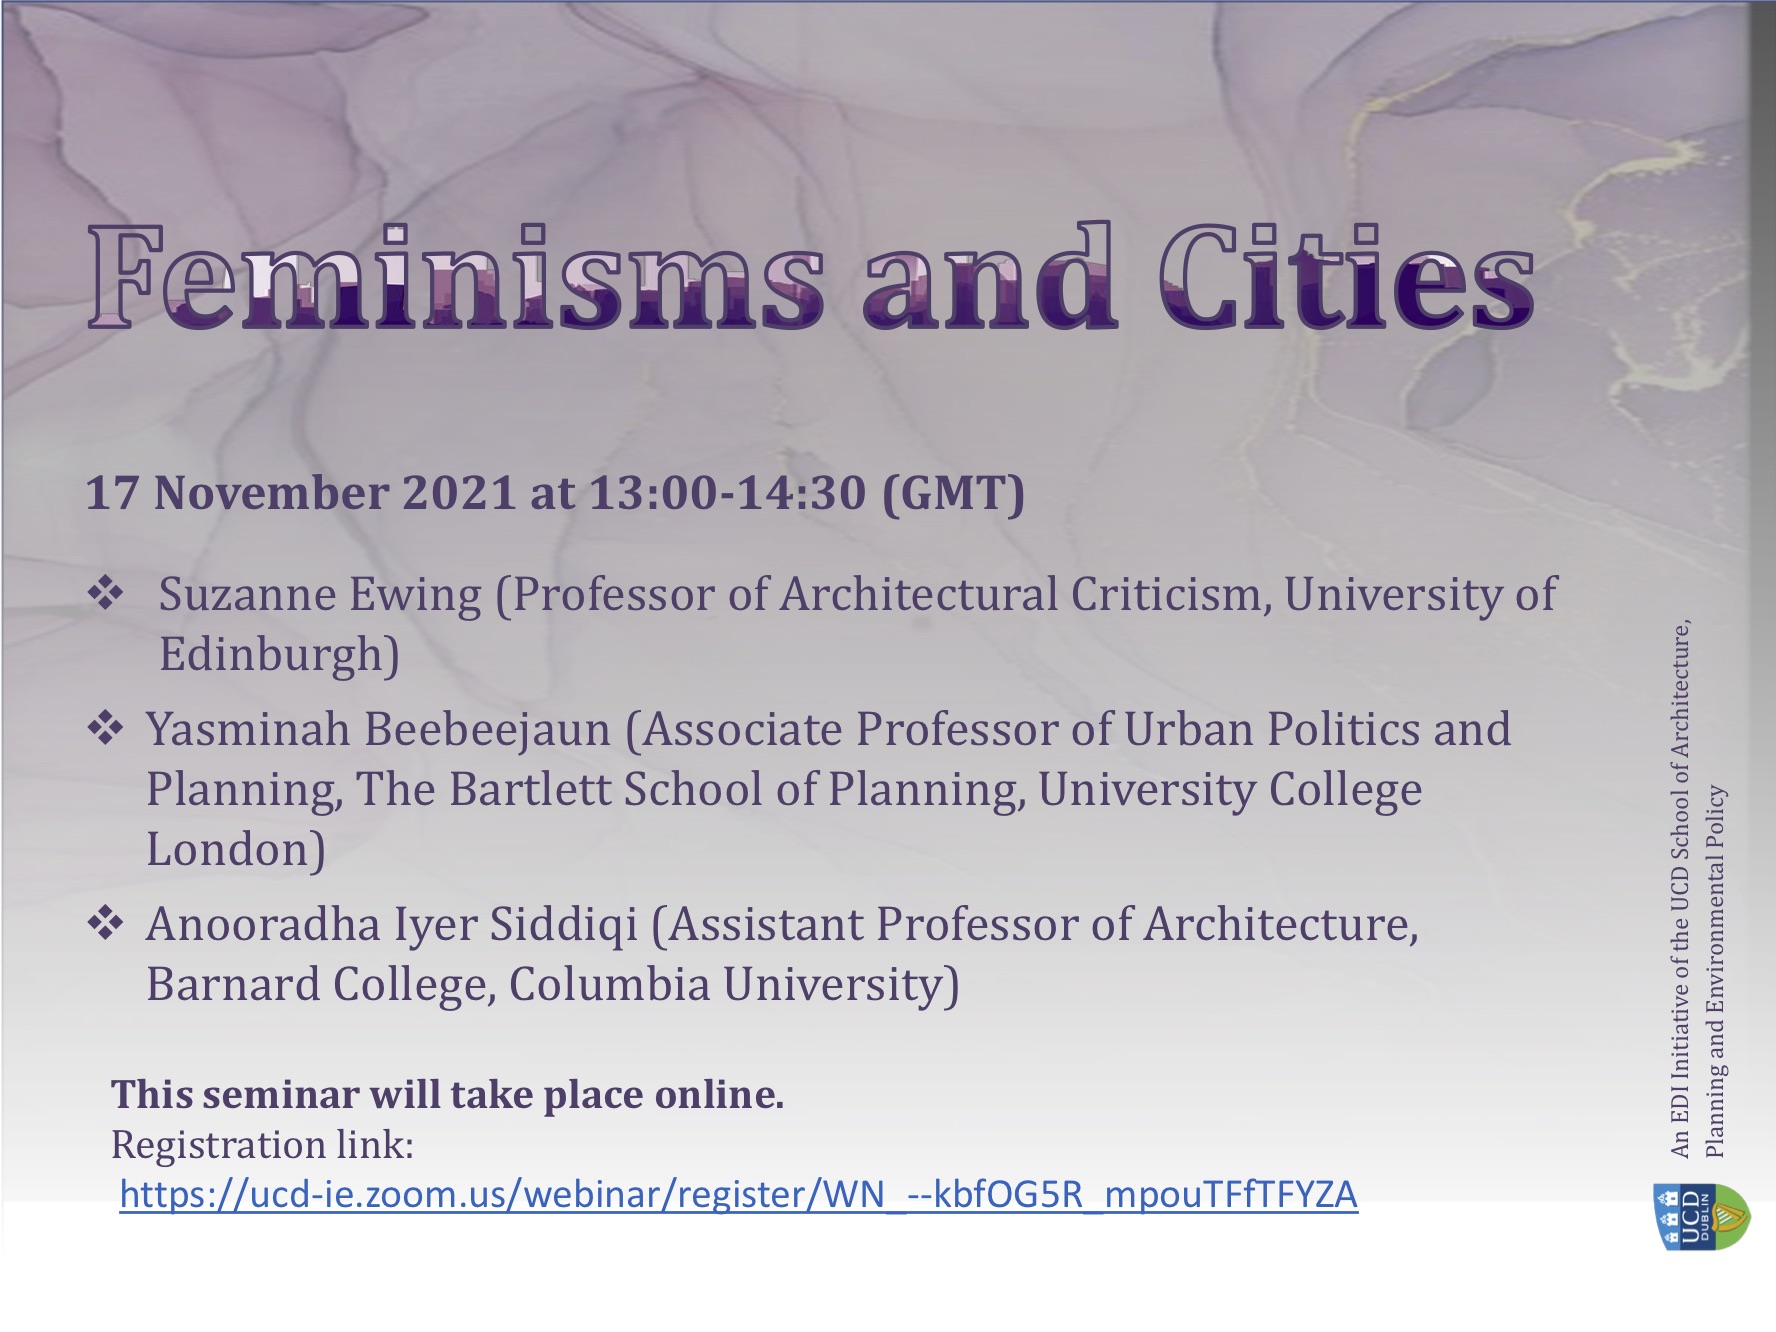 poster for UCD online event 17 November 2021, Feminisms and Cities